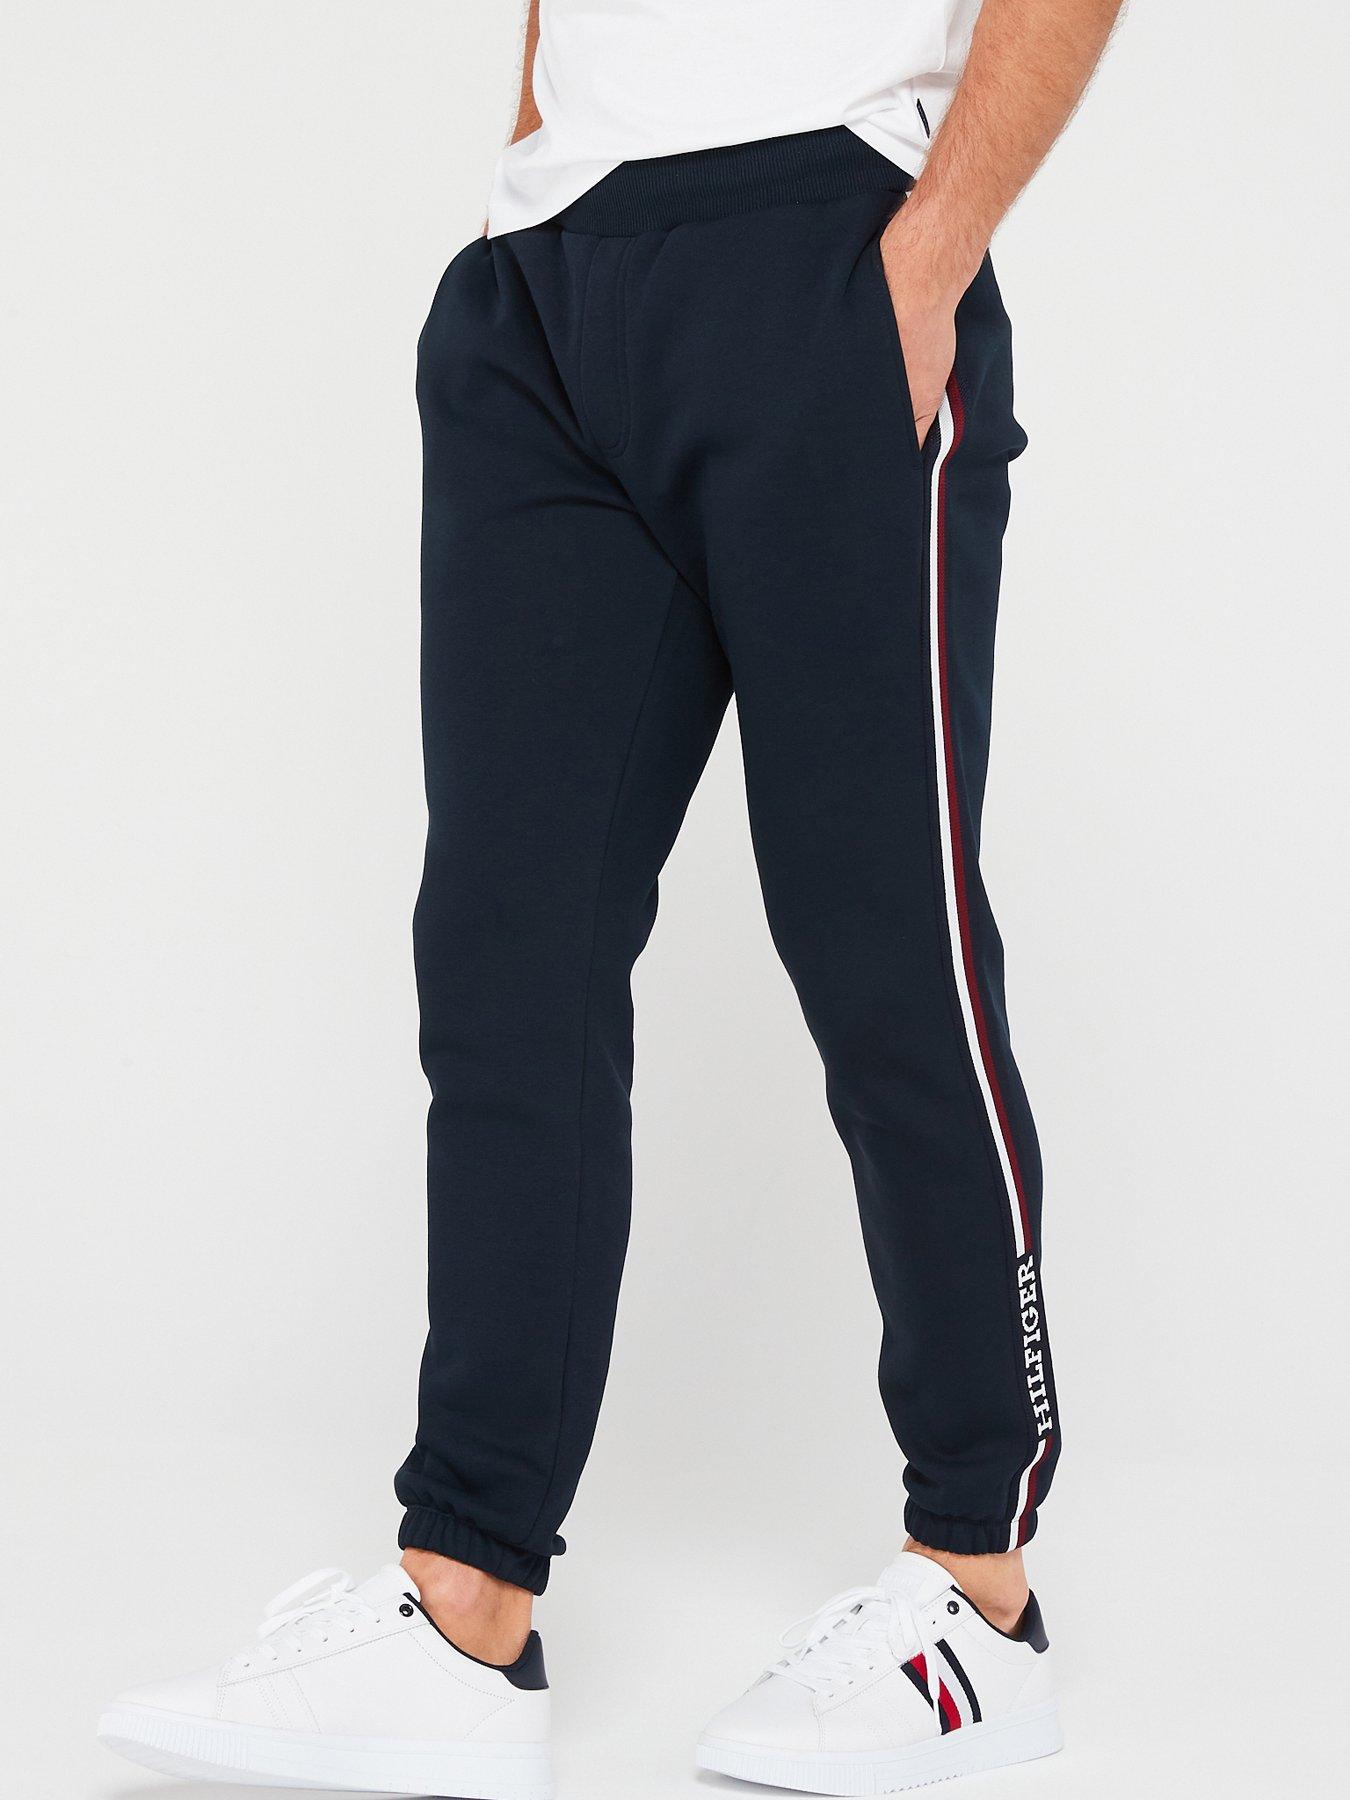 EMBROIDERED VIBE Gildan Women's Open Bottom Sweatpants with